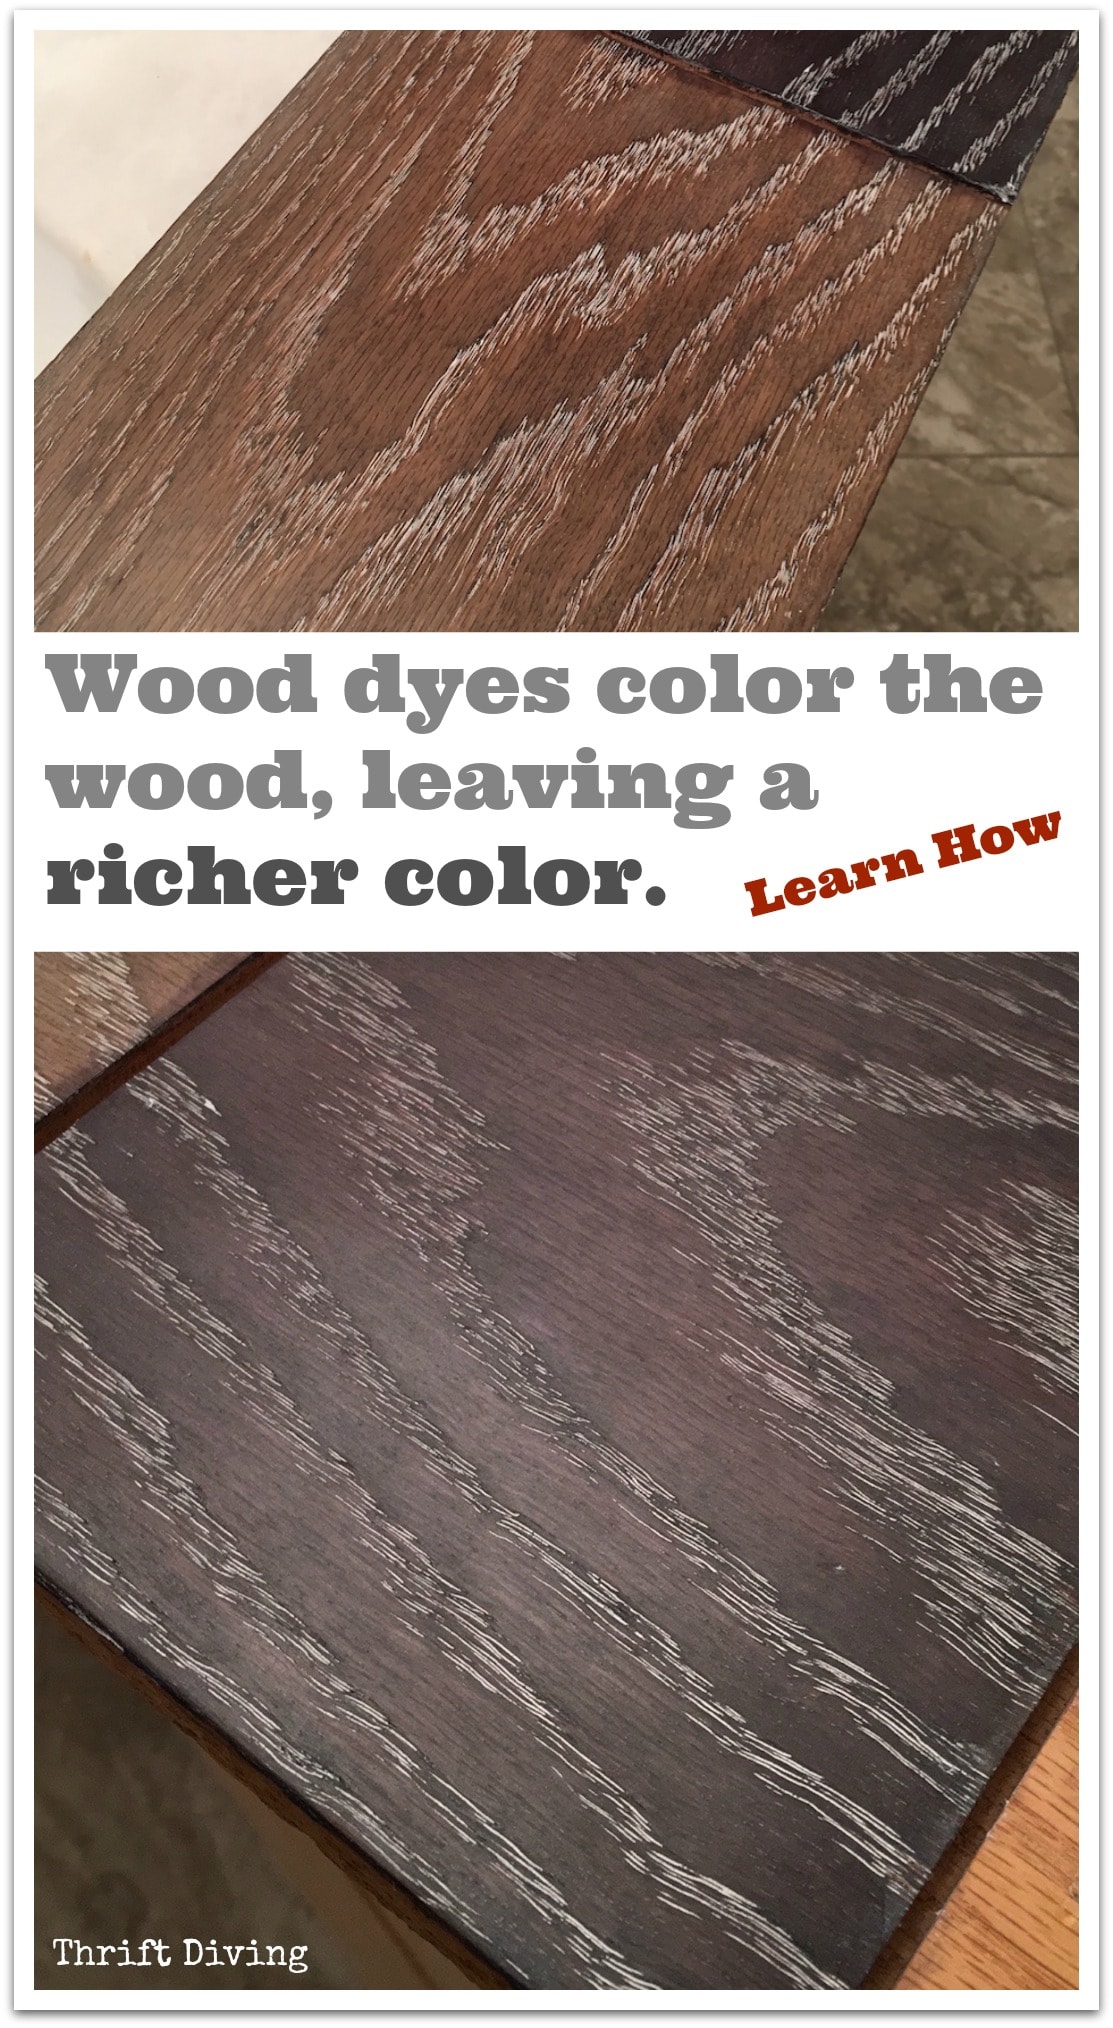 How to use wood dyes to create a richer color and use liming wax to highlight the grain - Thrift Diving